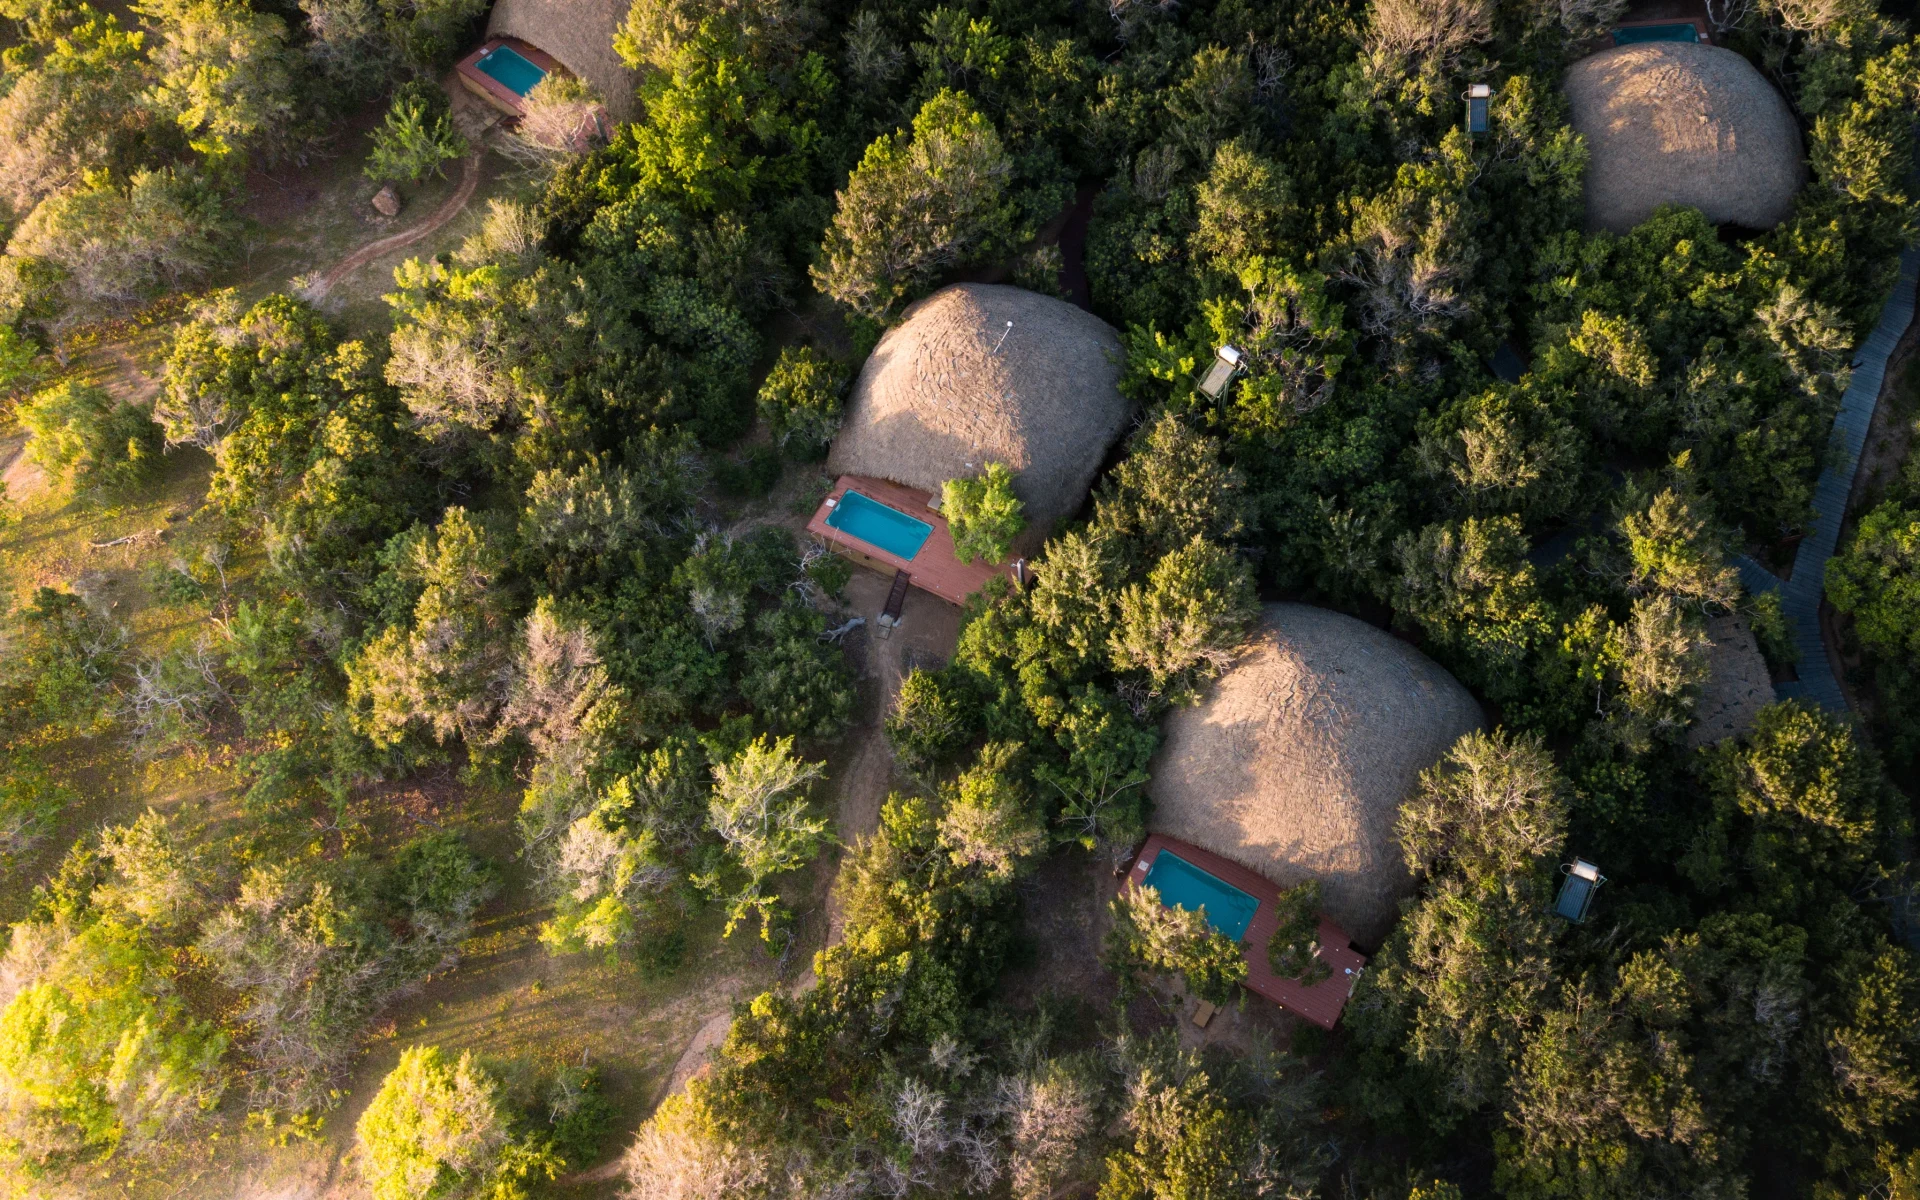 An aerial view of the thatched cottaged at Chena Huts.